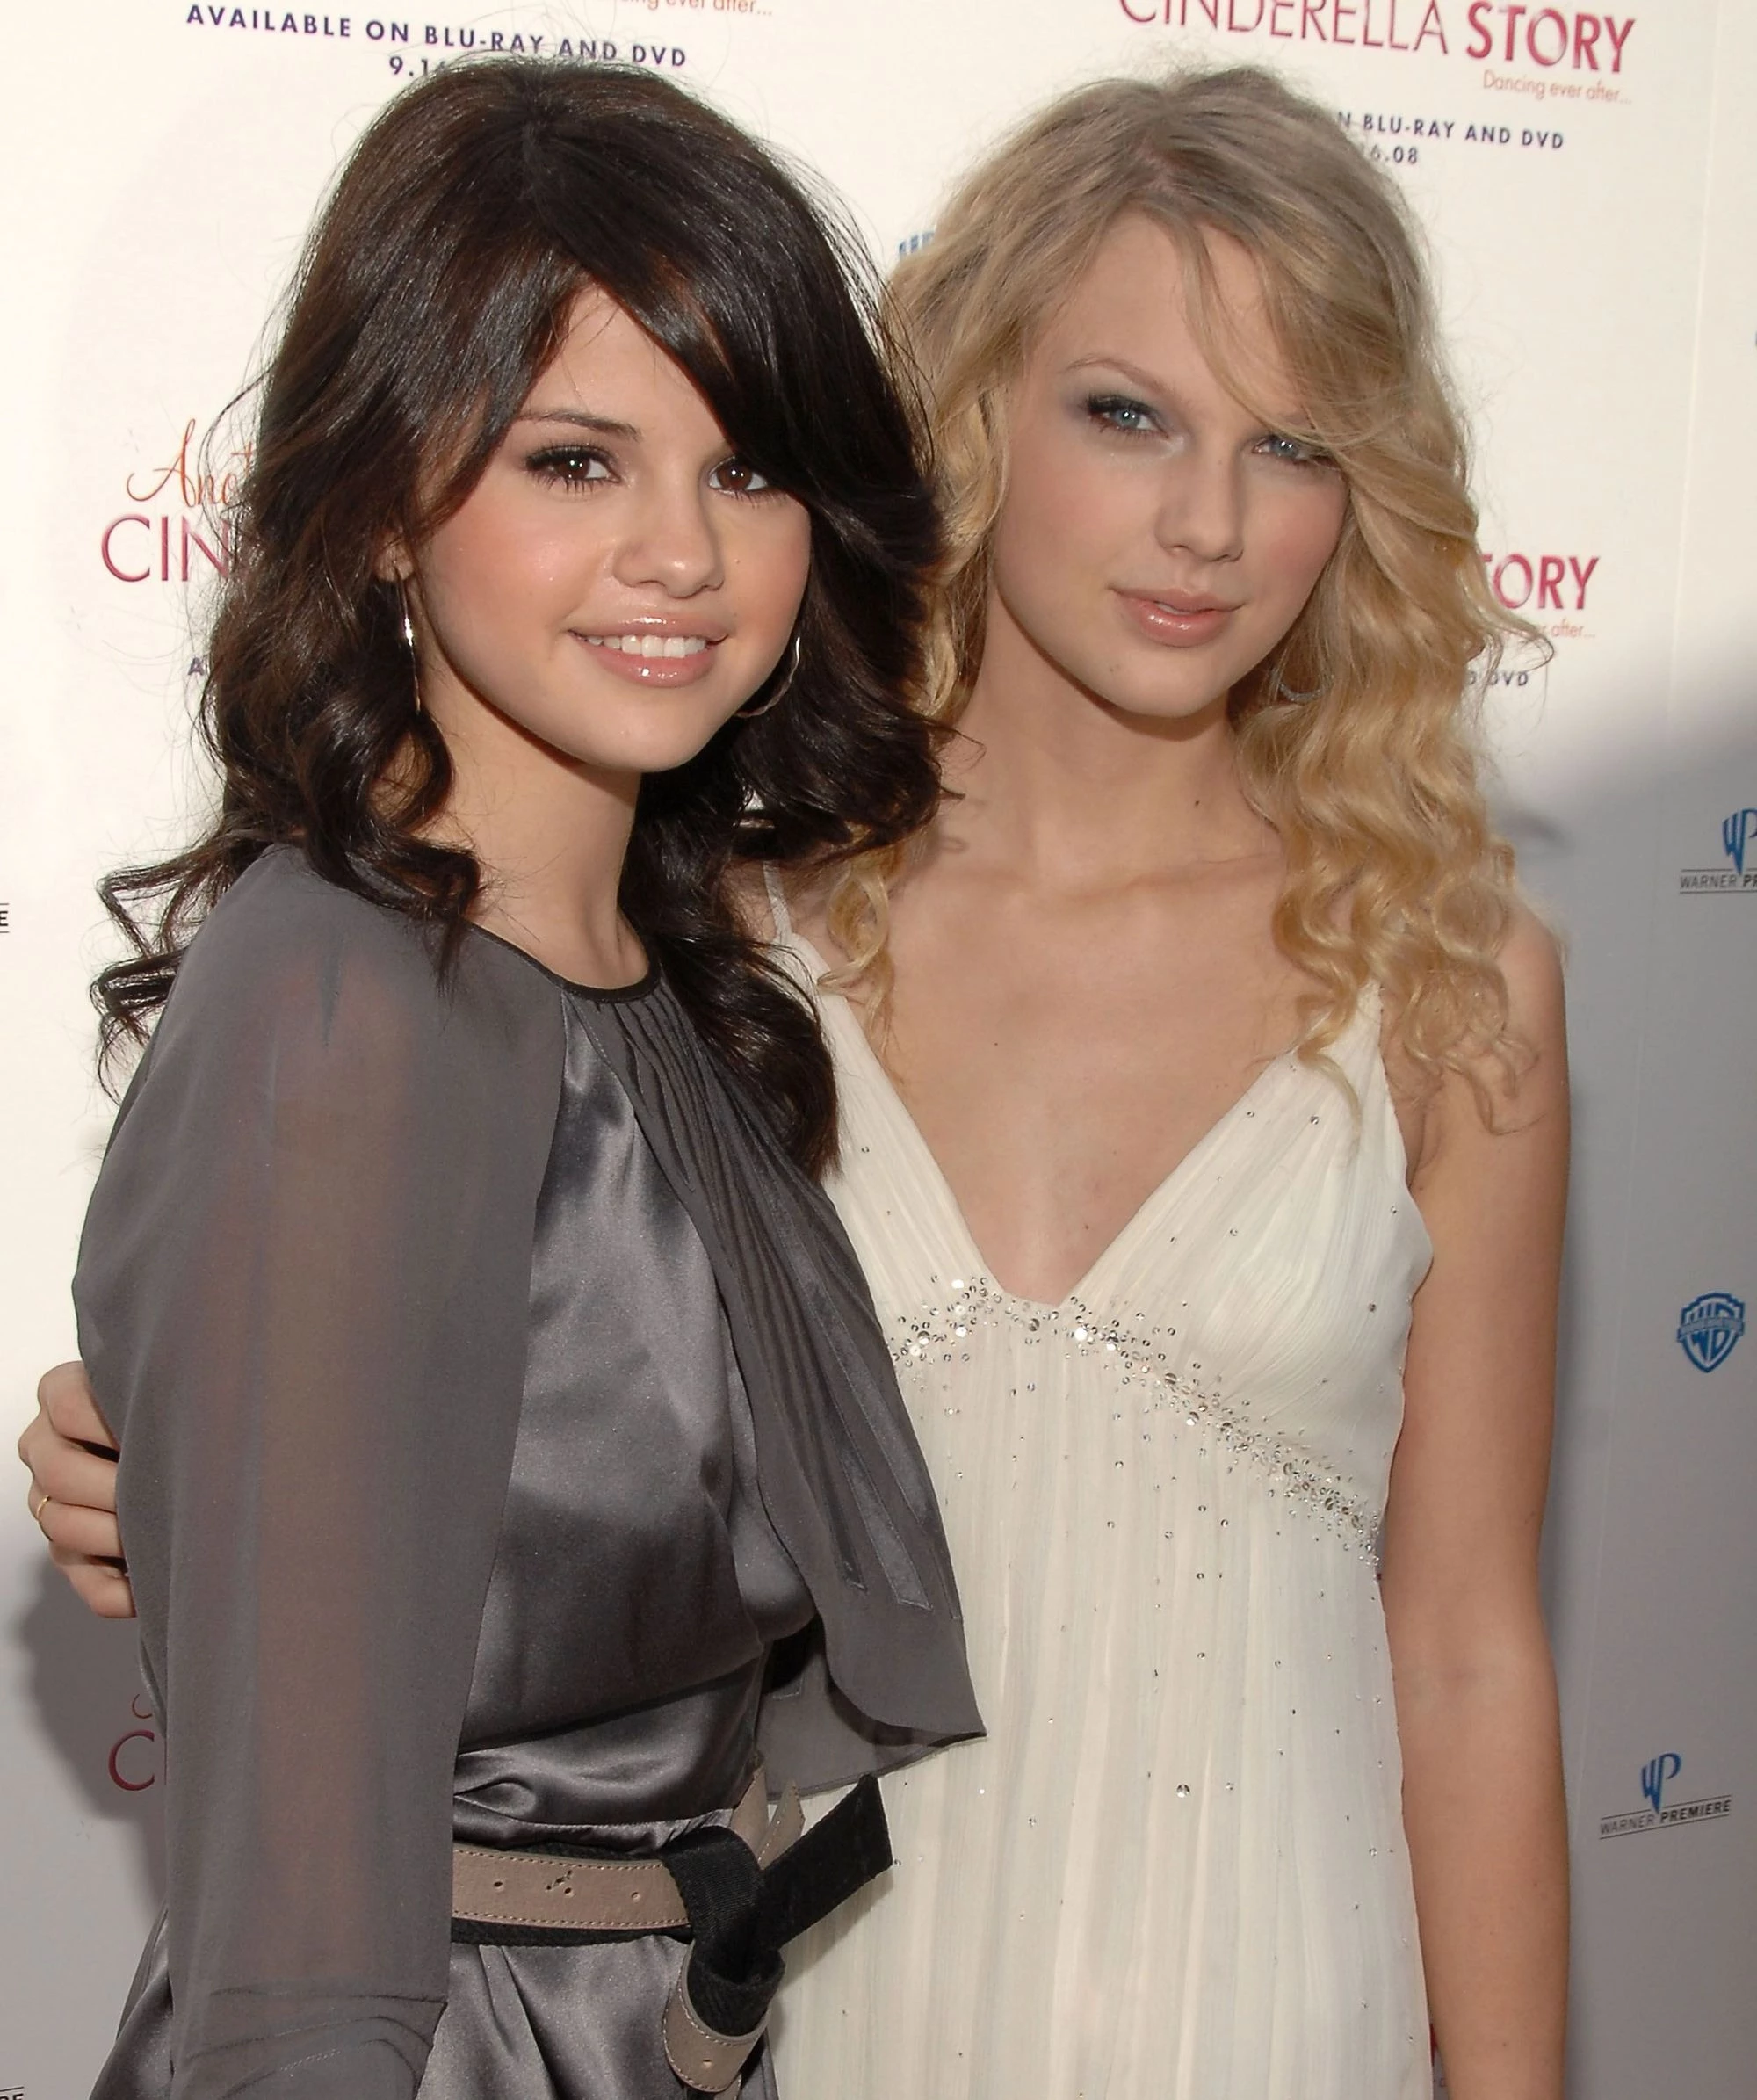 Selena Gomez and Taylor Swift first met in 2008